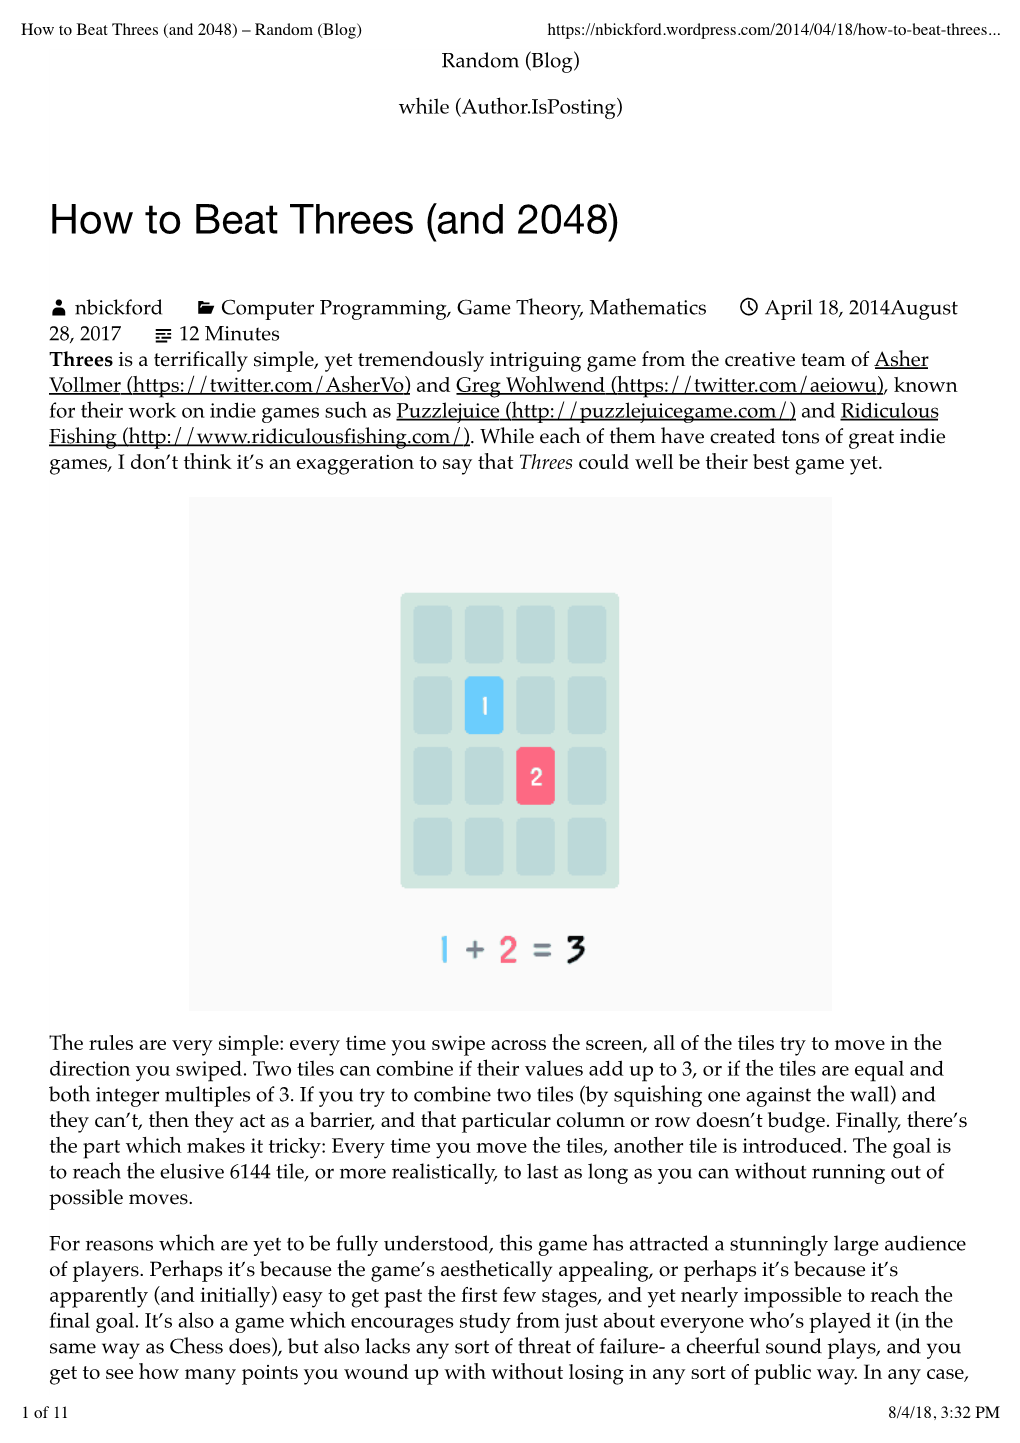 How to Beat Threes (And 2048) – Random (Blog)